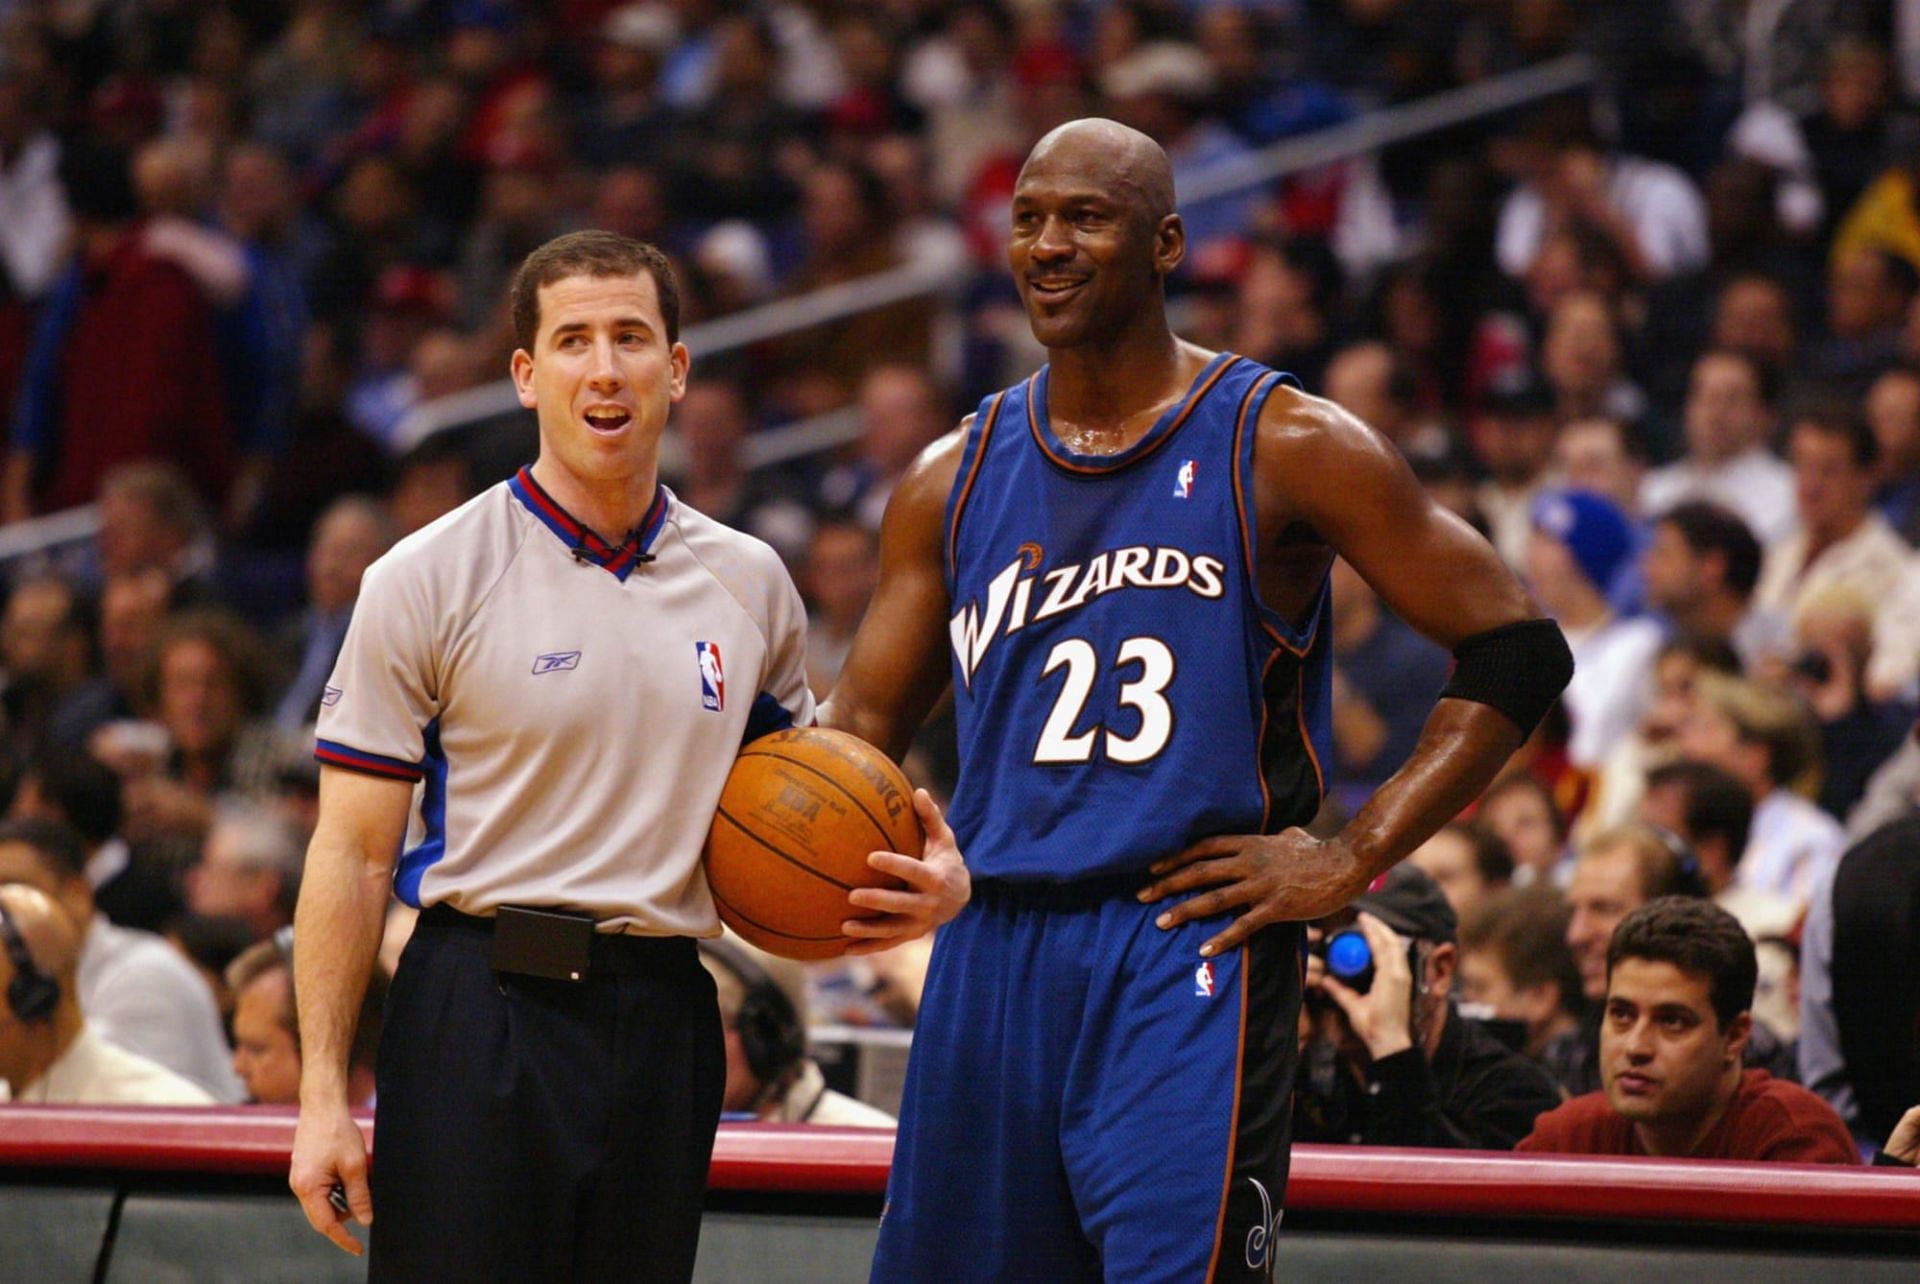 Jordan spent his final two seasons playing for the Washington Wizards